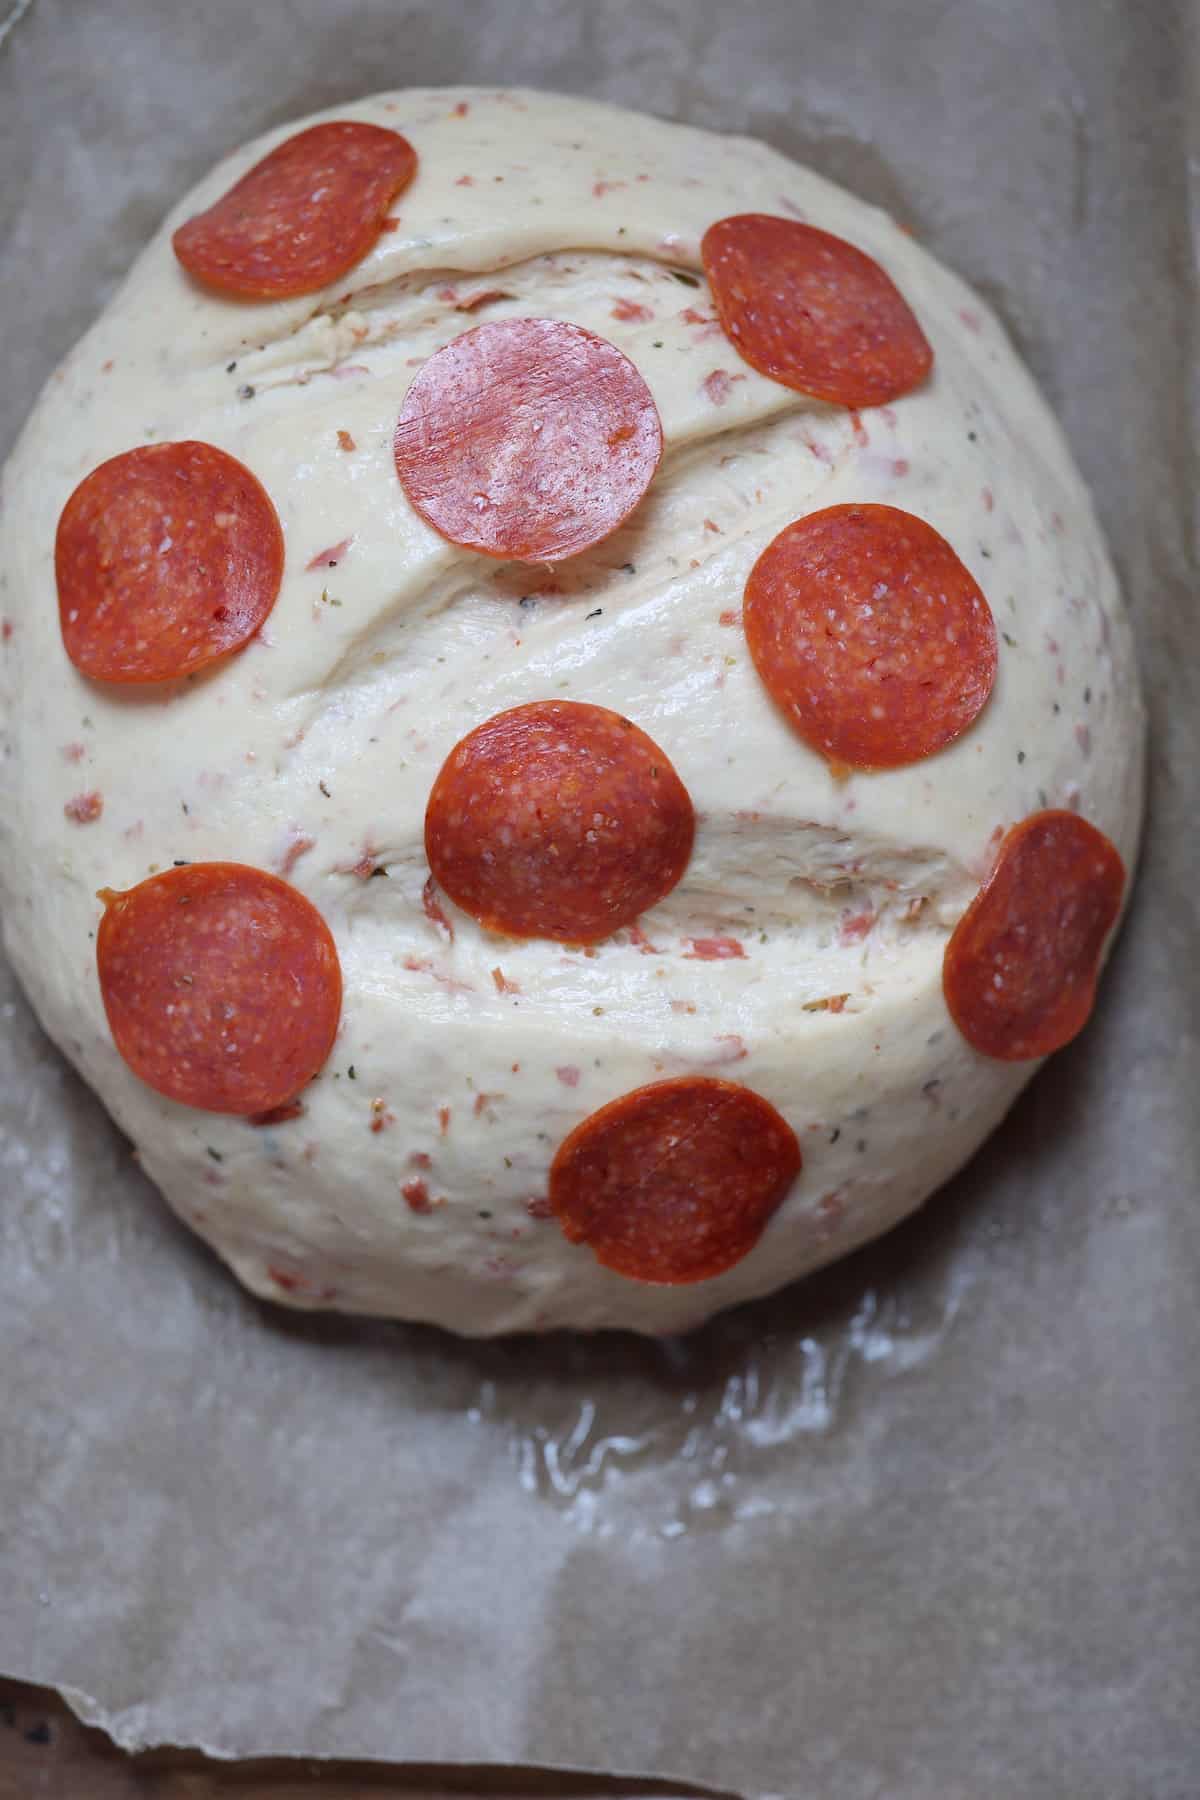 loaf of bread unbaked and topped with pepperoni